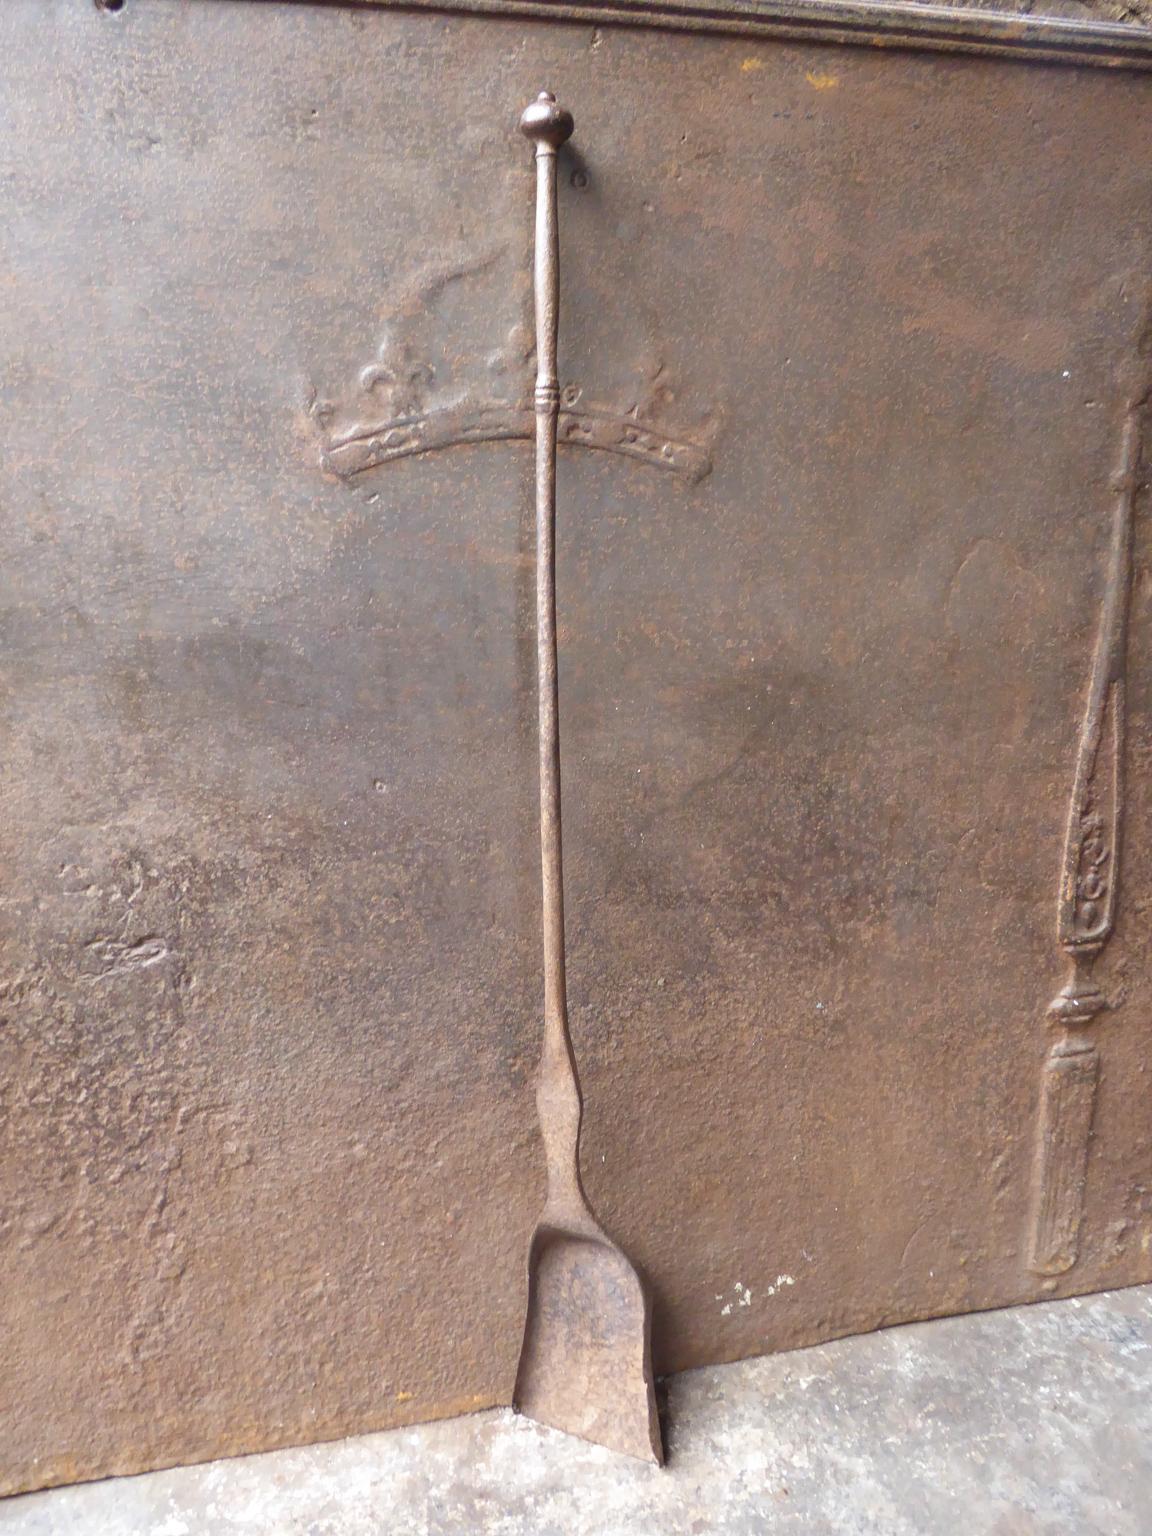 Large 18th century French fireplace shovel made of wrought iron. The shovel is in a good condition.